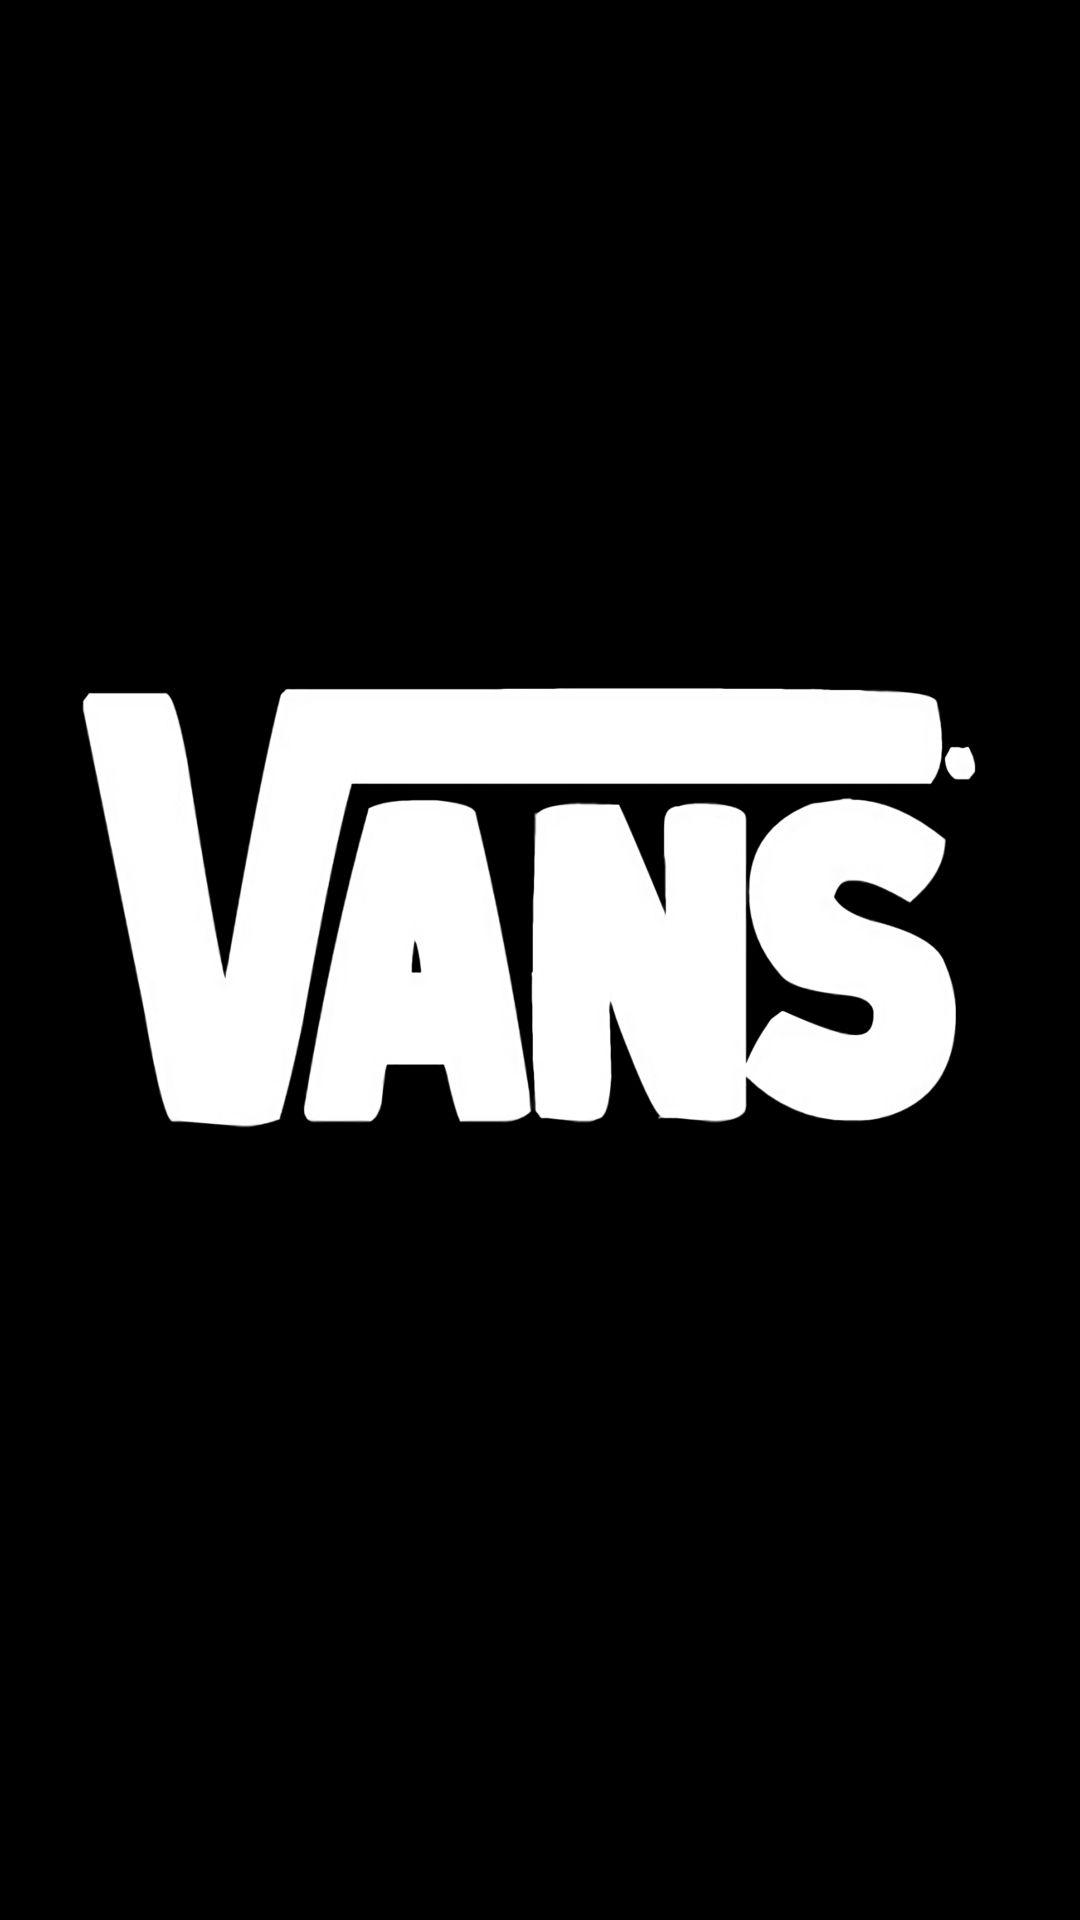 Vans to see more creative wallpaper! - @mobile9